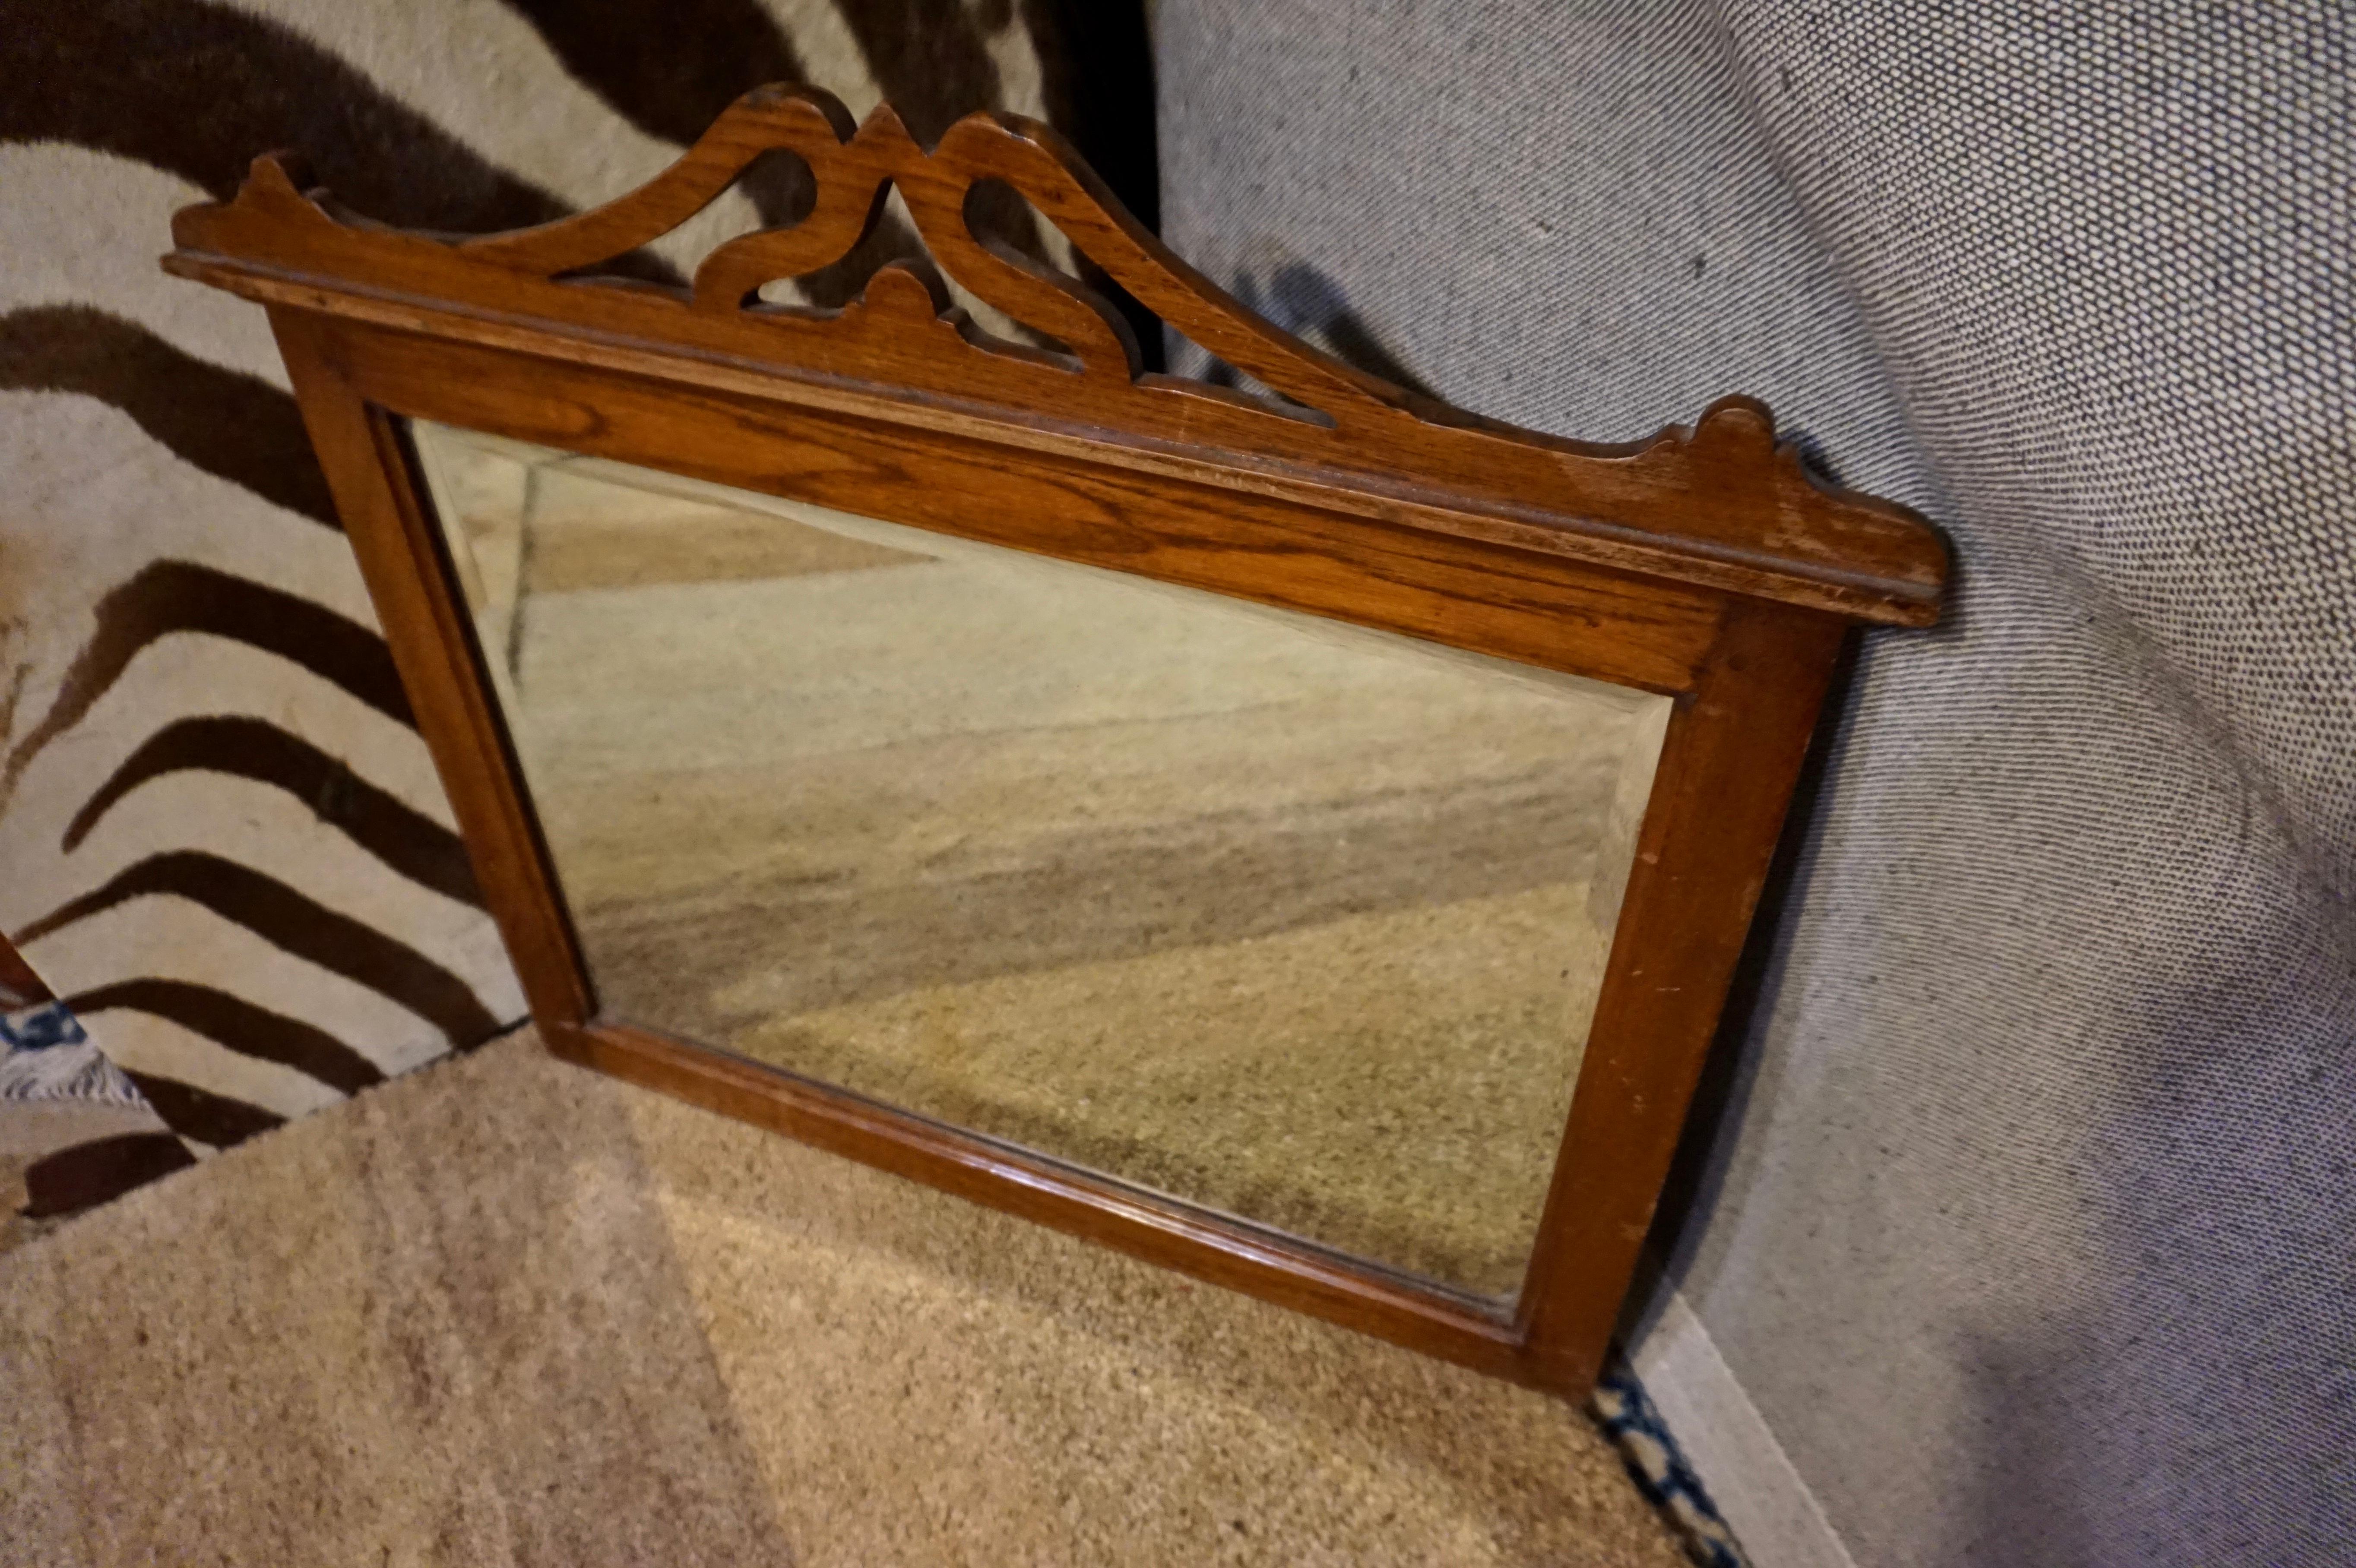 Hand carved Art Nouveau mirror with bevel glass. Scrolling motif meeting at the apex. Brass hardware indicates it was originally used on a pedestal. Presently being used as an over mantel (fireplace) mirror.